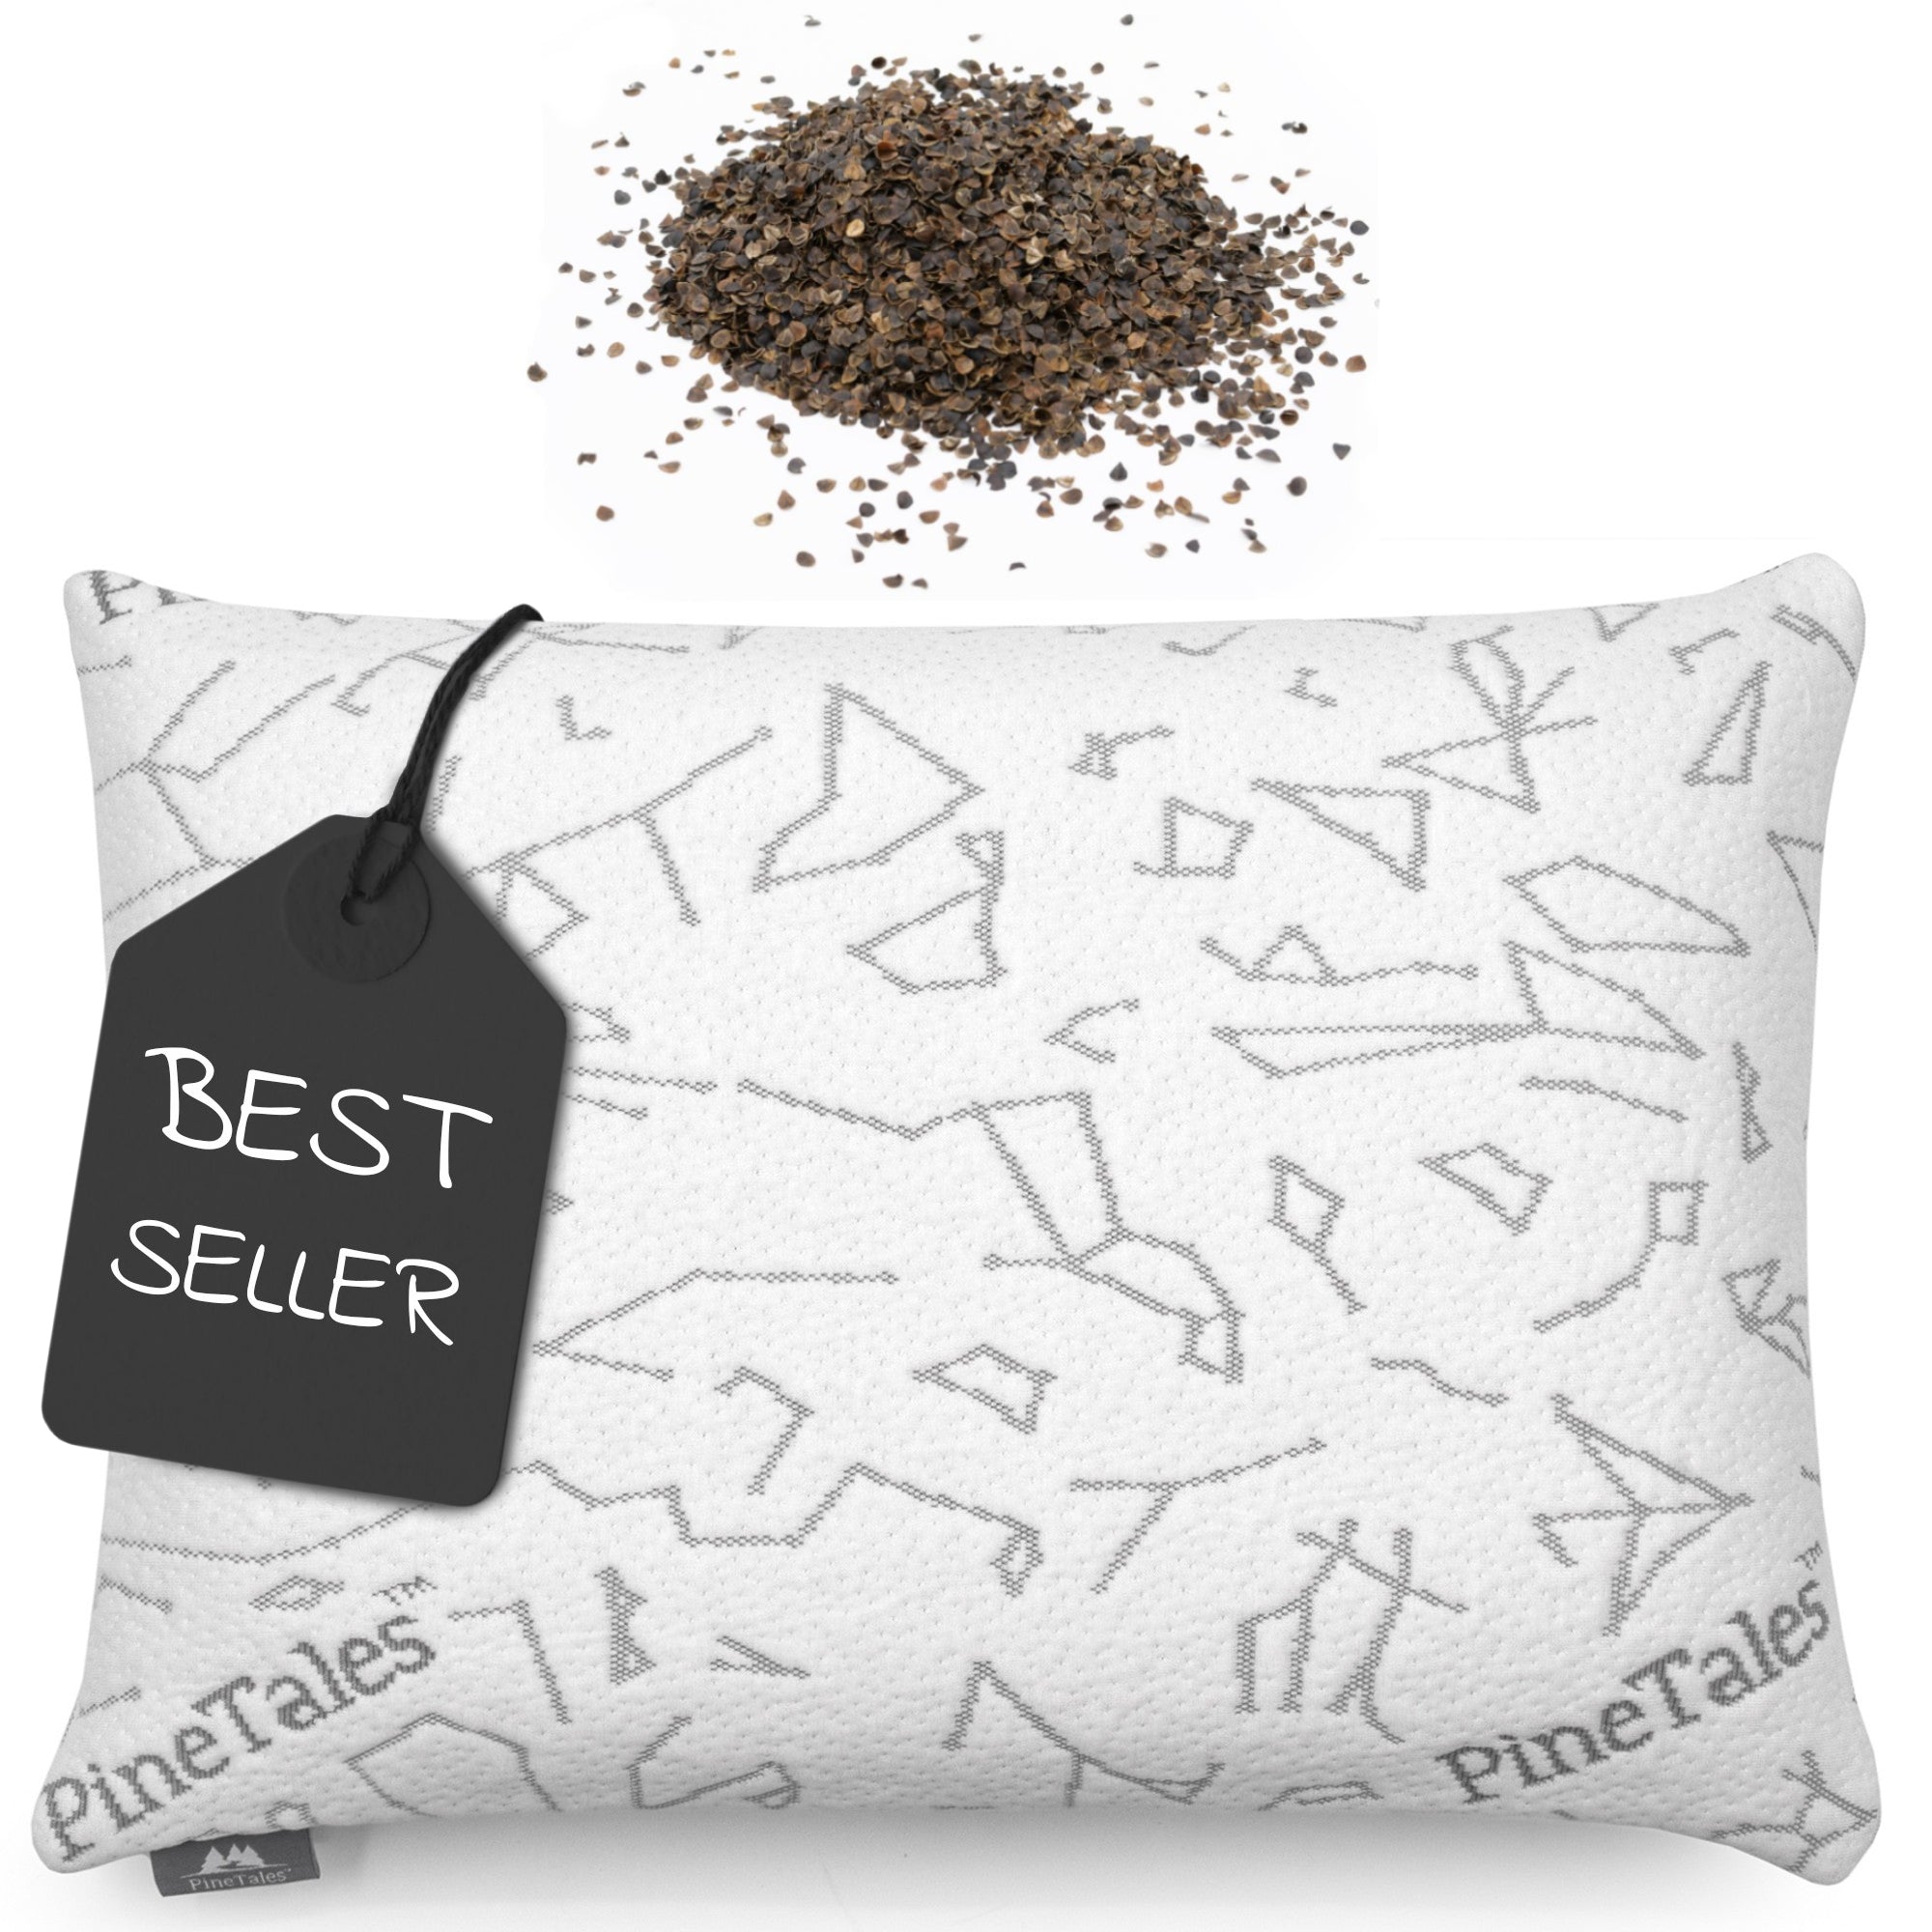 Buckwheat Pillow Model with Designer Bamboo Pillowcase by PineTales